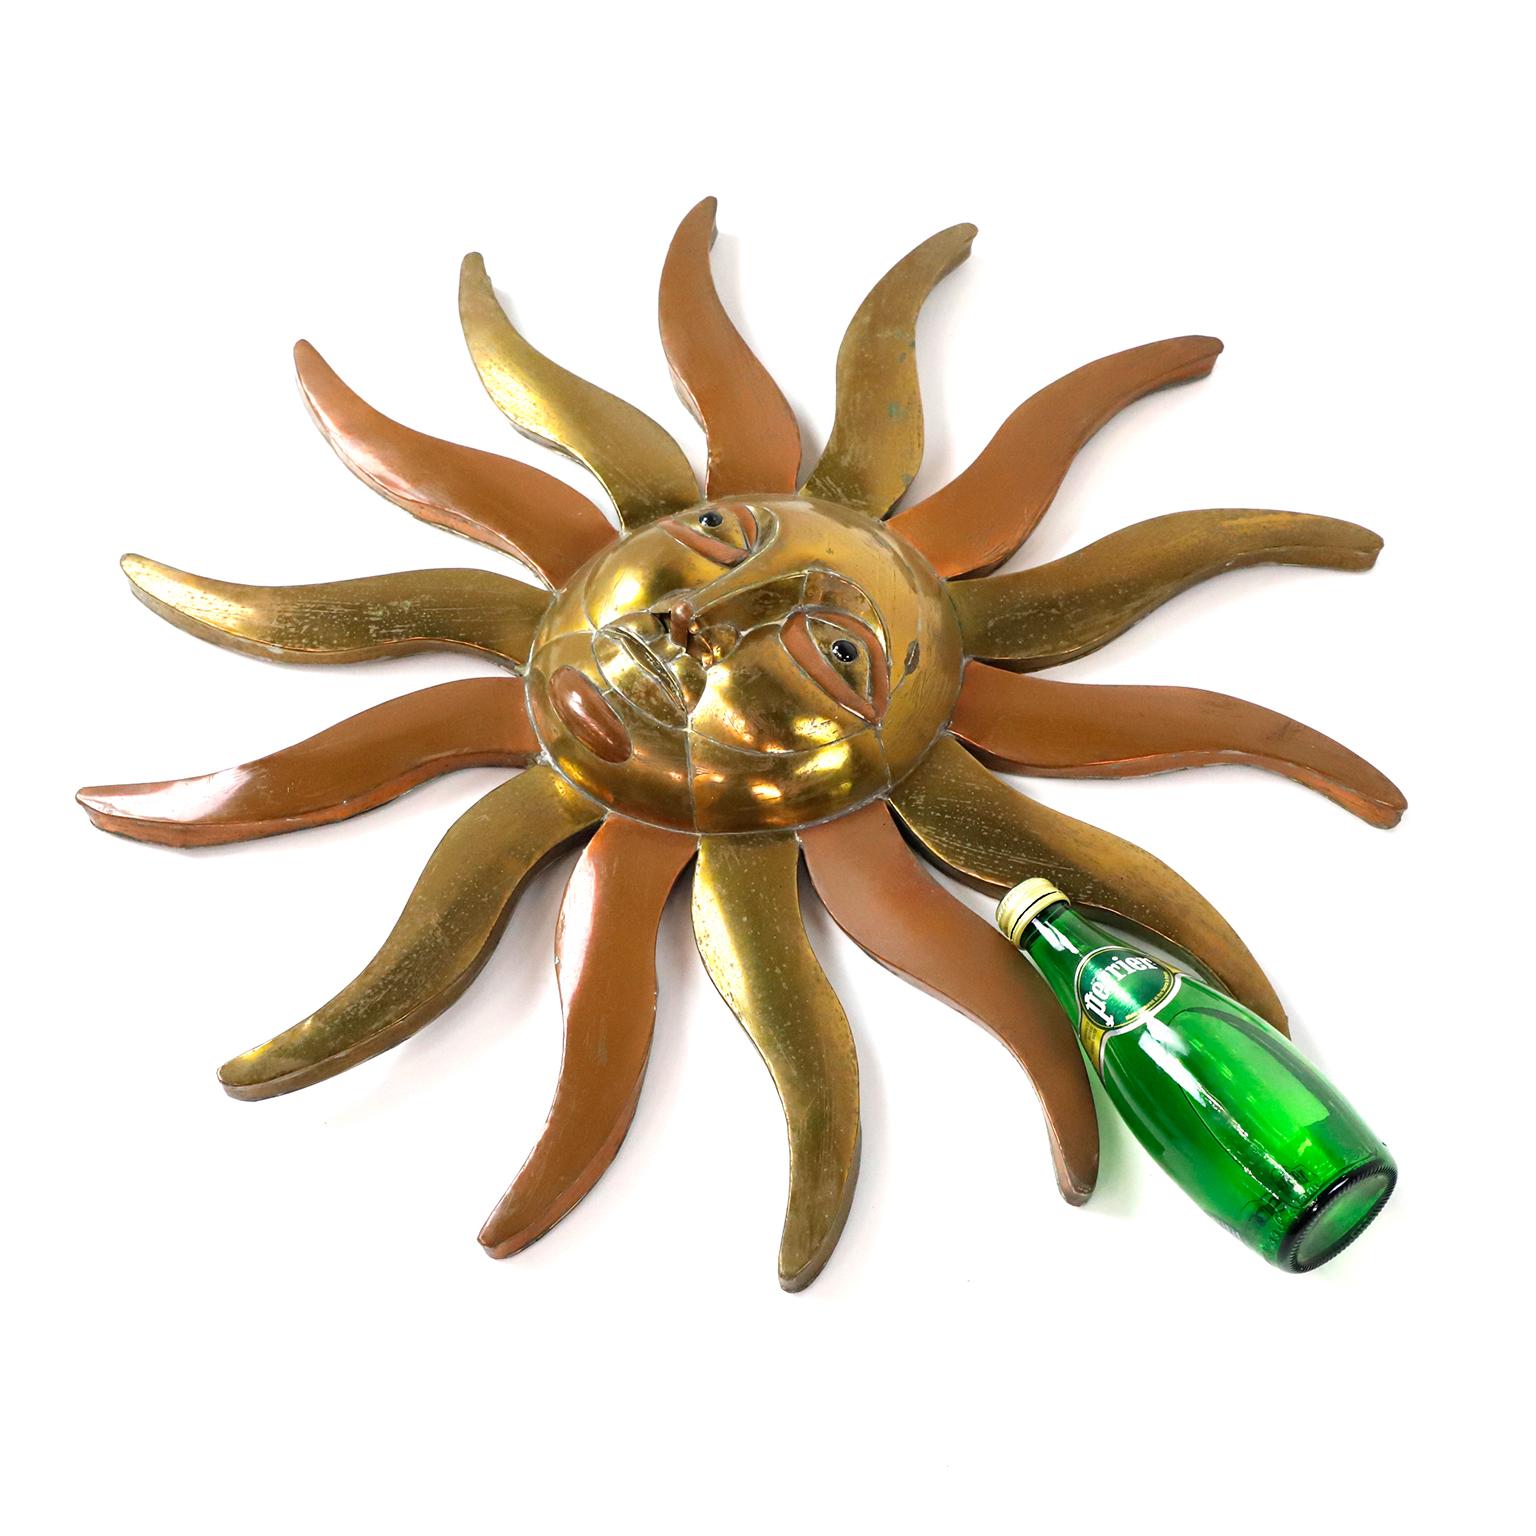 Mexican Surreal Brutalist Sun Sculpture in Brass and Bronze by Sergio Bustamante For Sale